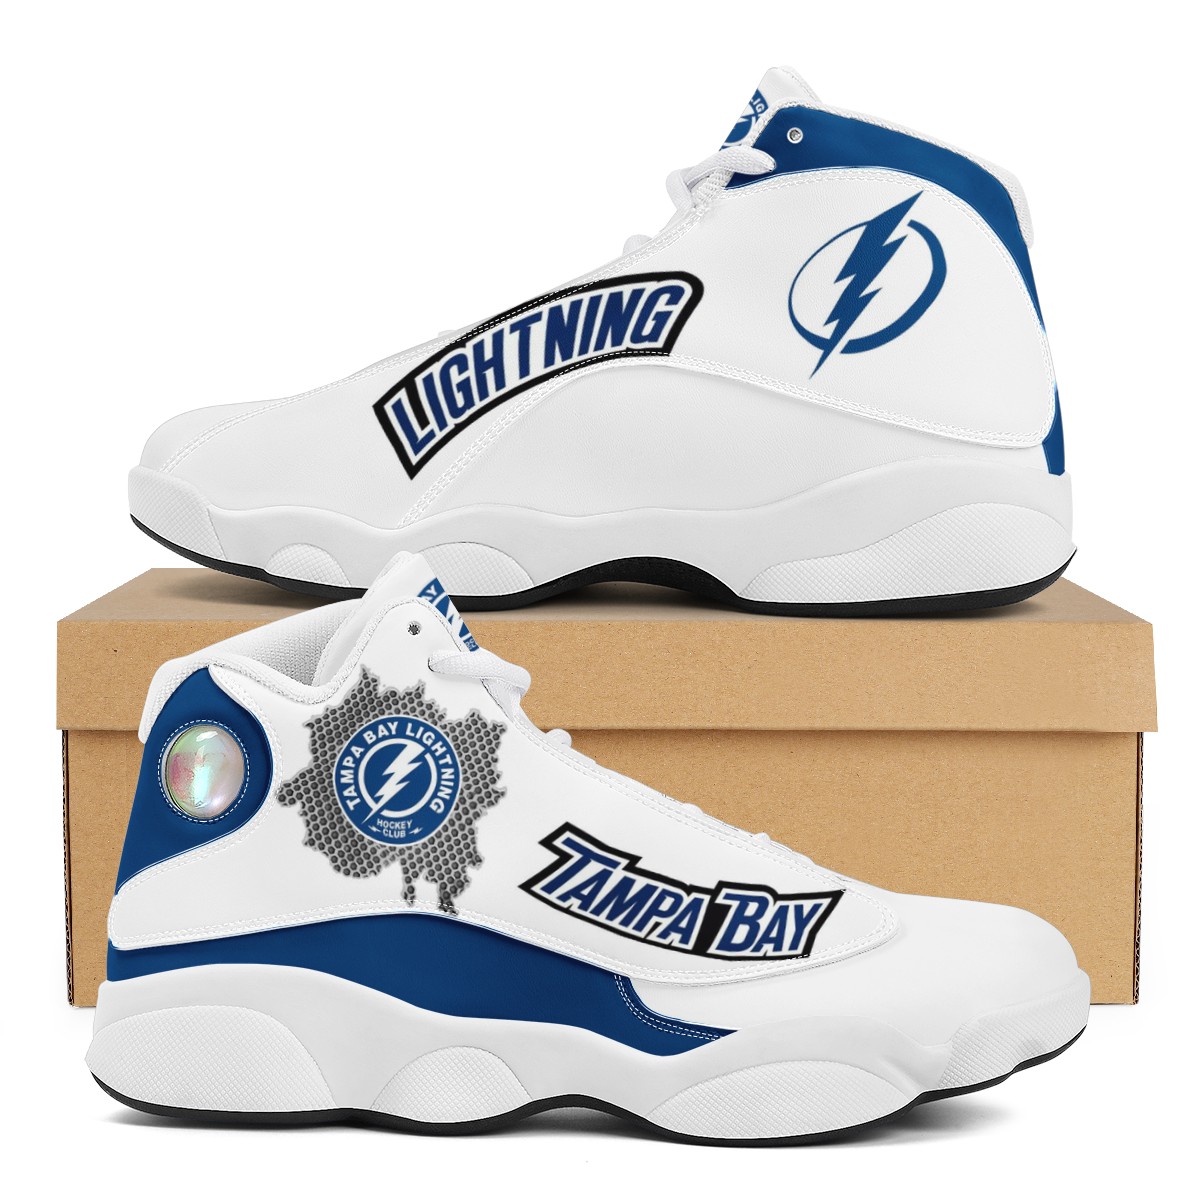 Men's Tampa Bay Lightning Limited Edition JD13 Sneakers 001